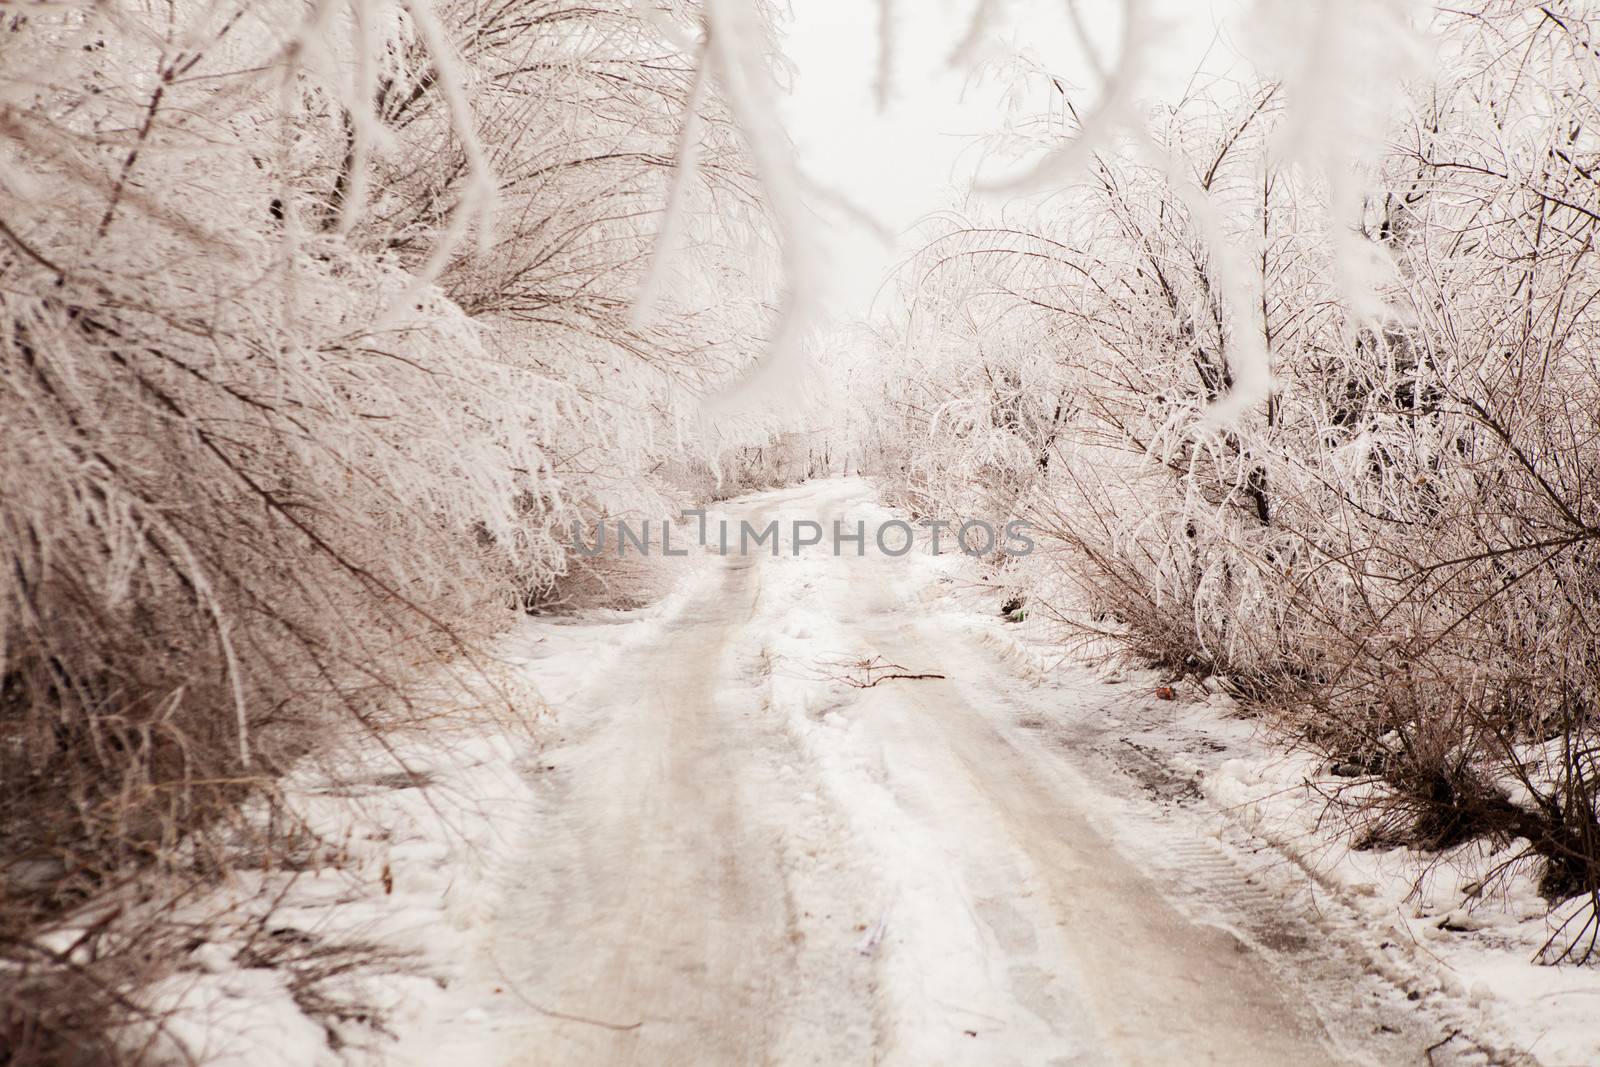 winter road toned in sepia 